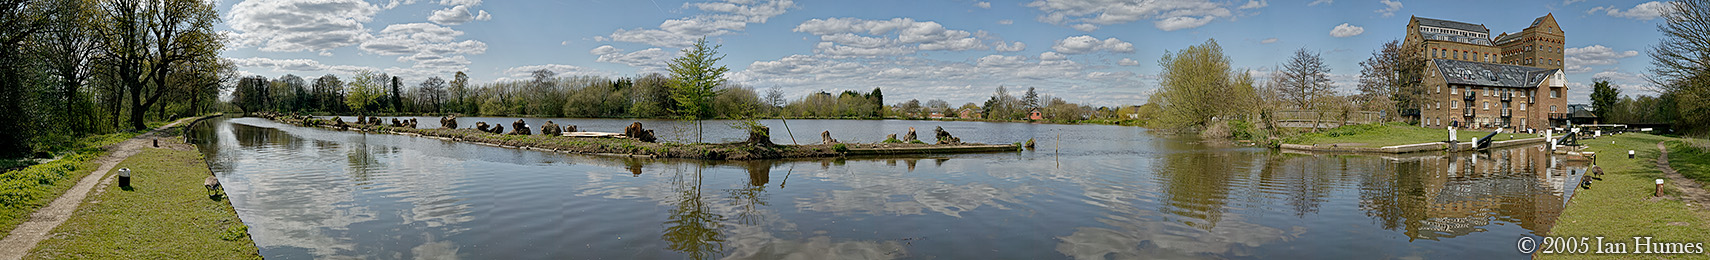 Wide-angle stitched panoramc photograph of Coxes Lock and Mill on the Wey navigation near Weybridge